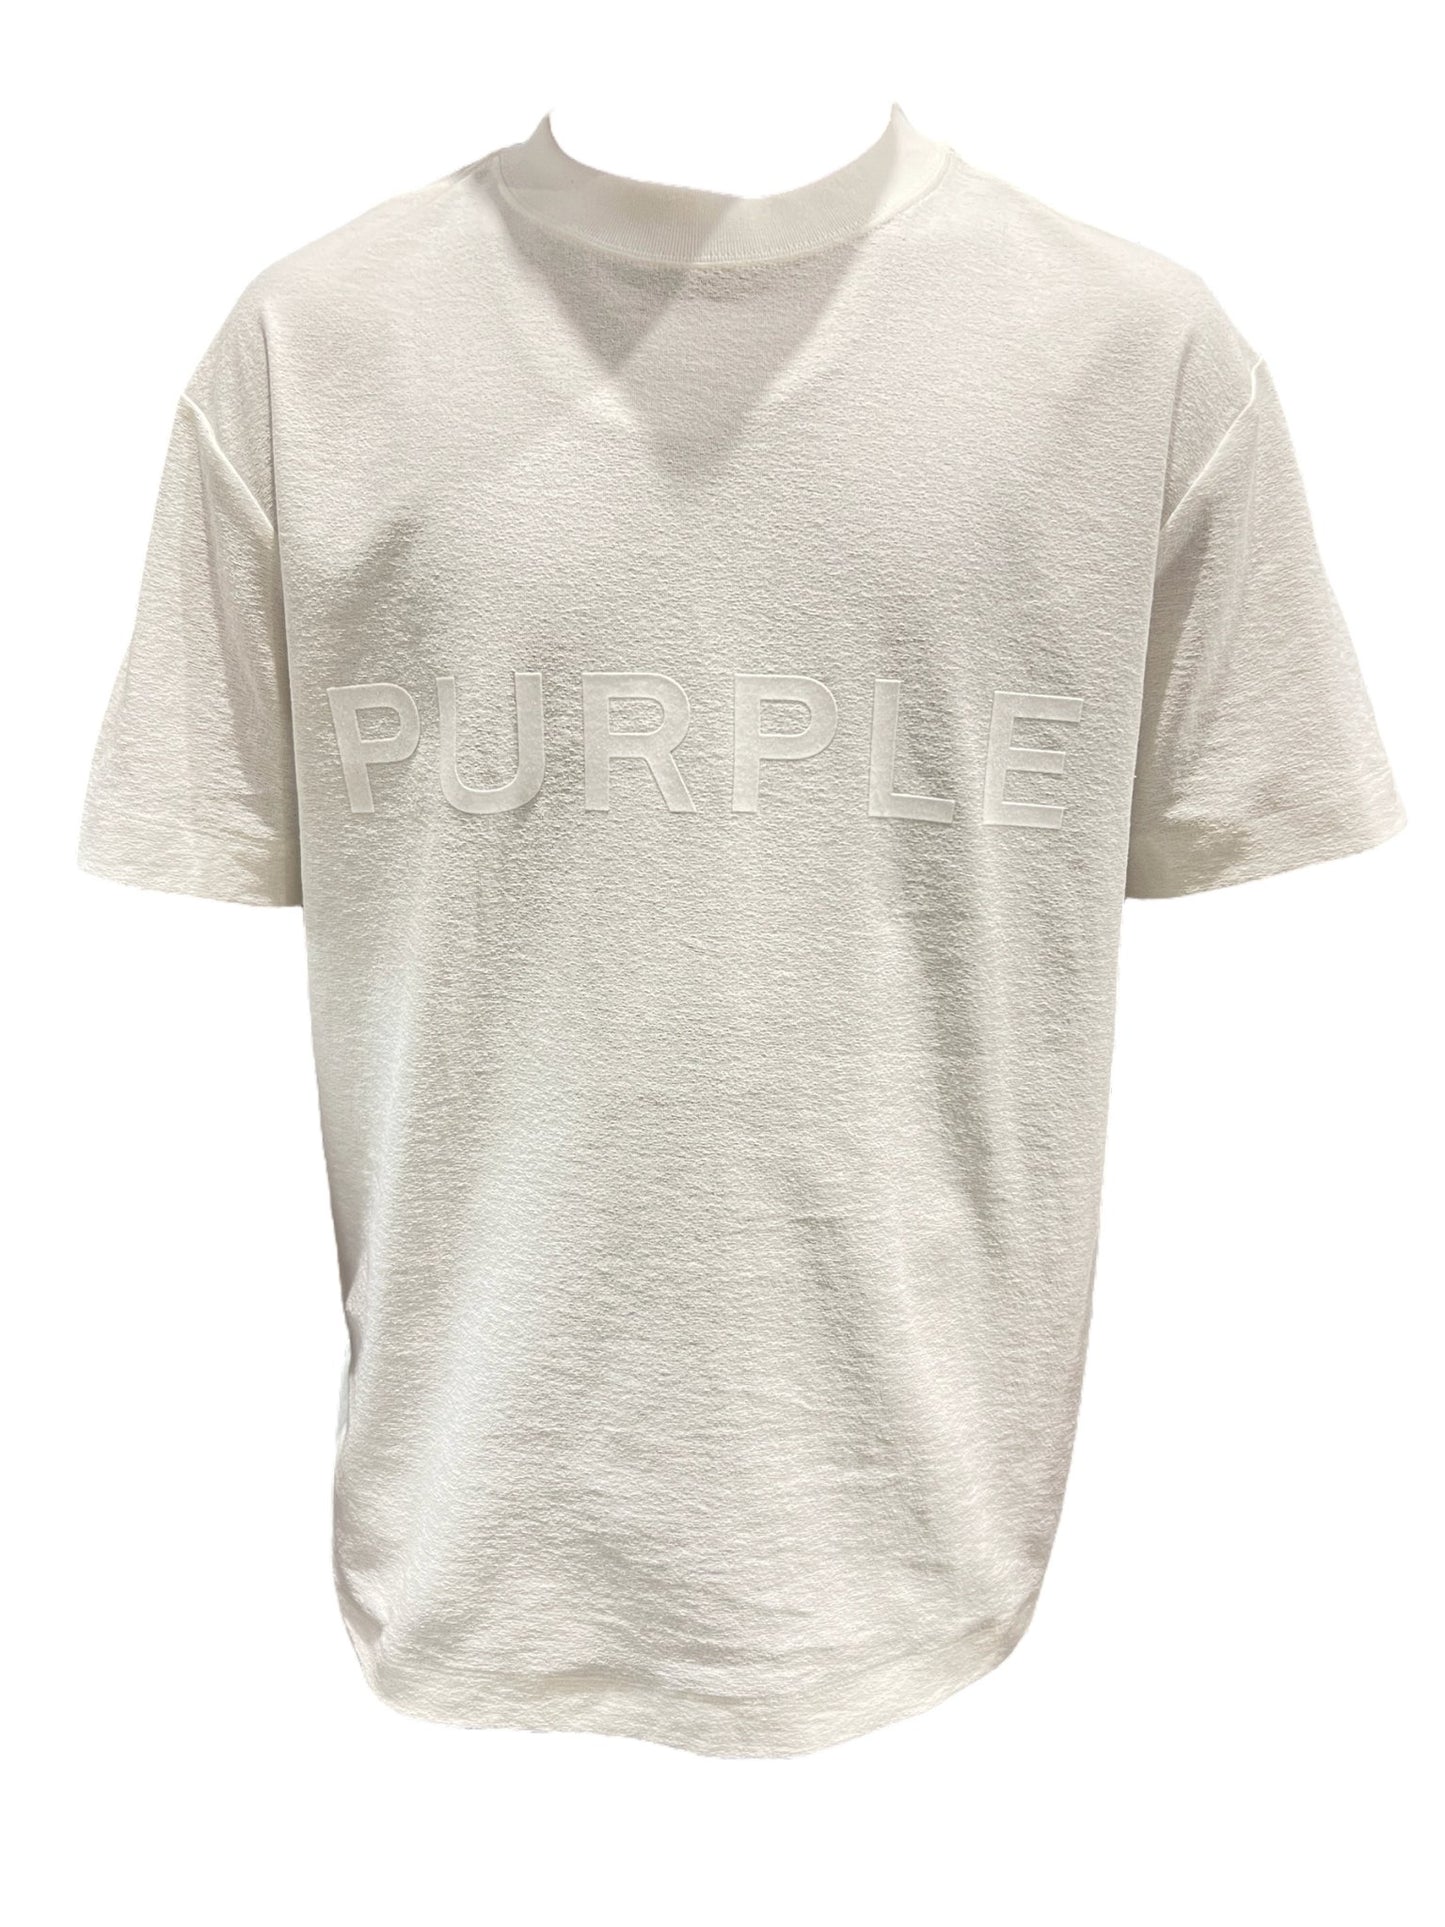 An PURPLE BRAND P104-JWCM TEXTURED JERSEY SS TEE OFF WHITE with the word "PURPLE BRAND" on it.